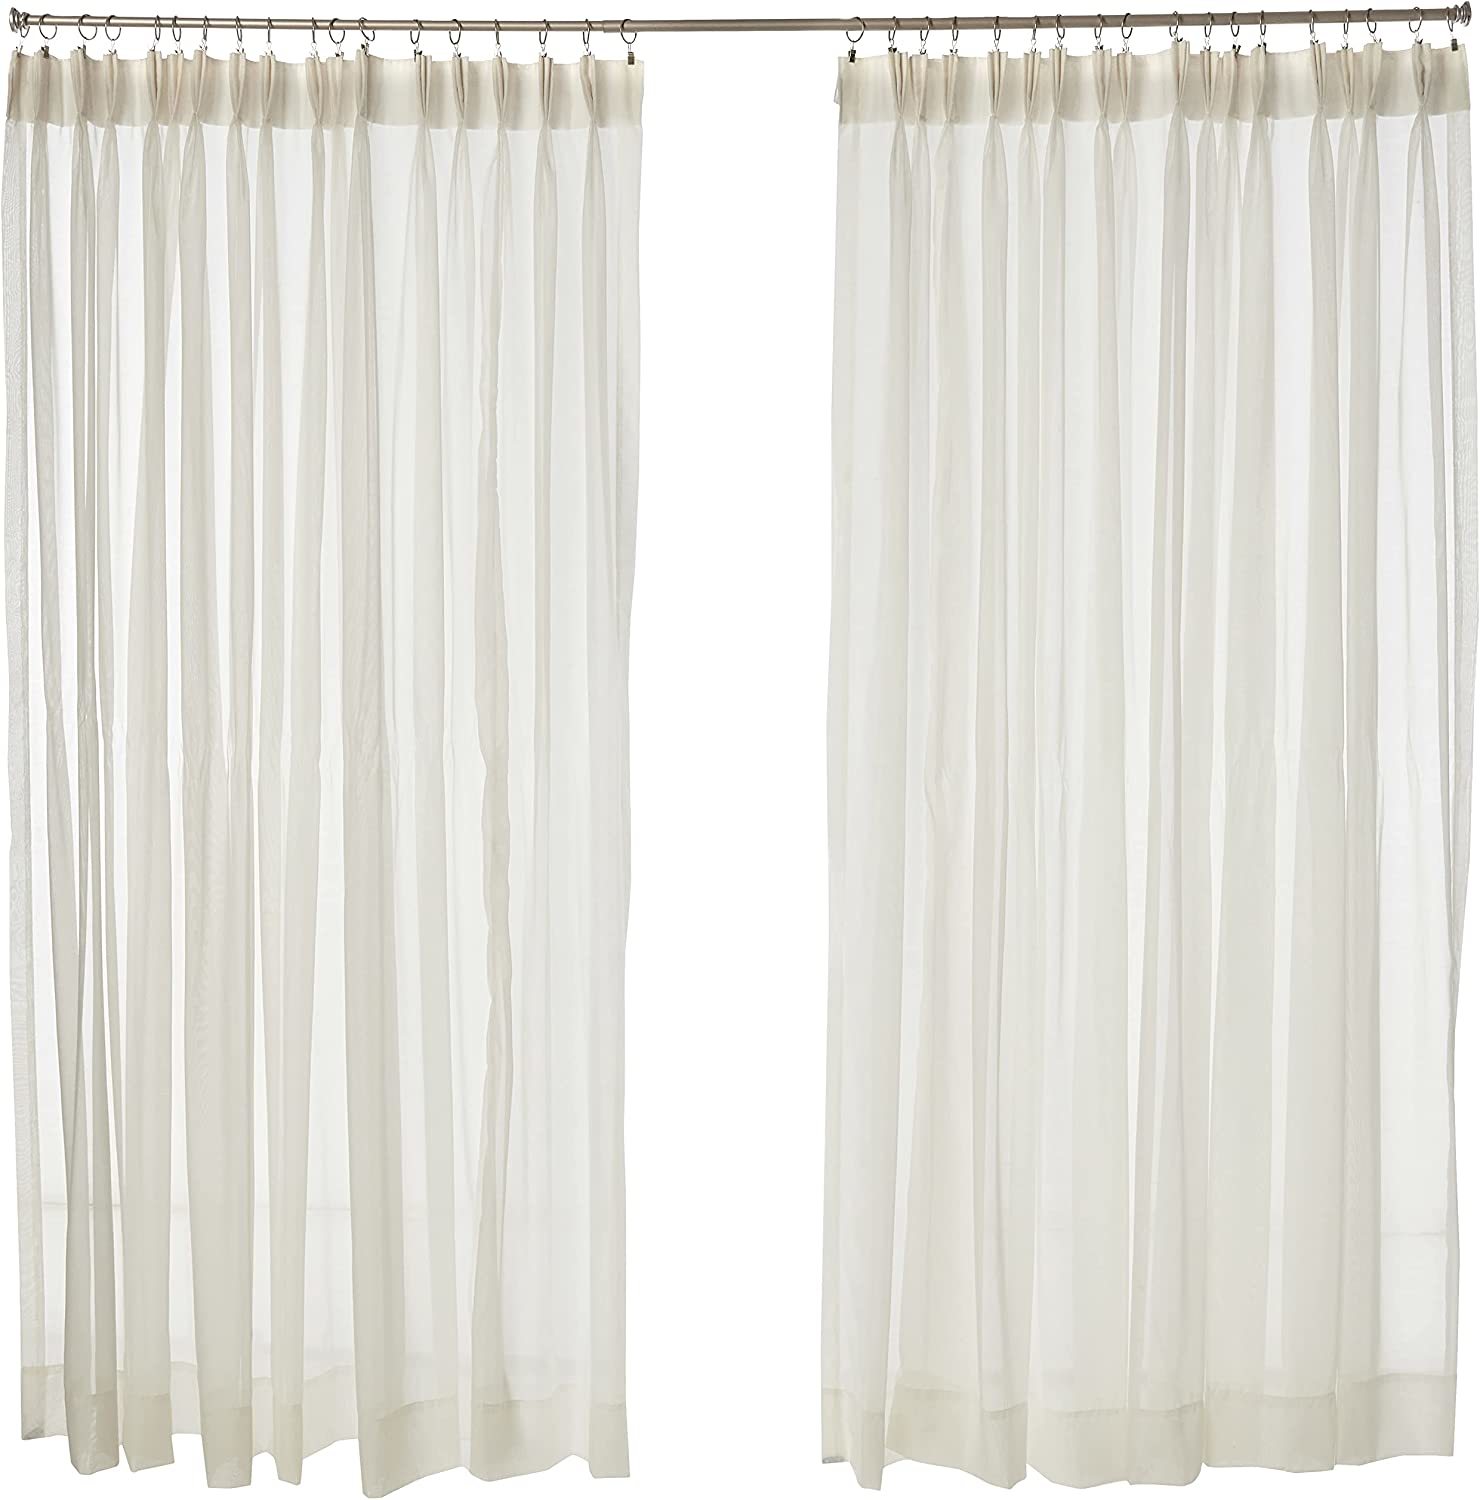 Stylemaster Splendor Pinch Pleated Drapes Pair, 2 Of 60" By 84", Beige. - $71.97